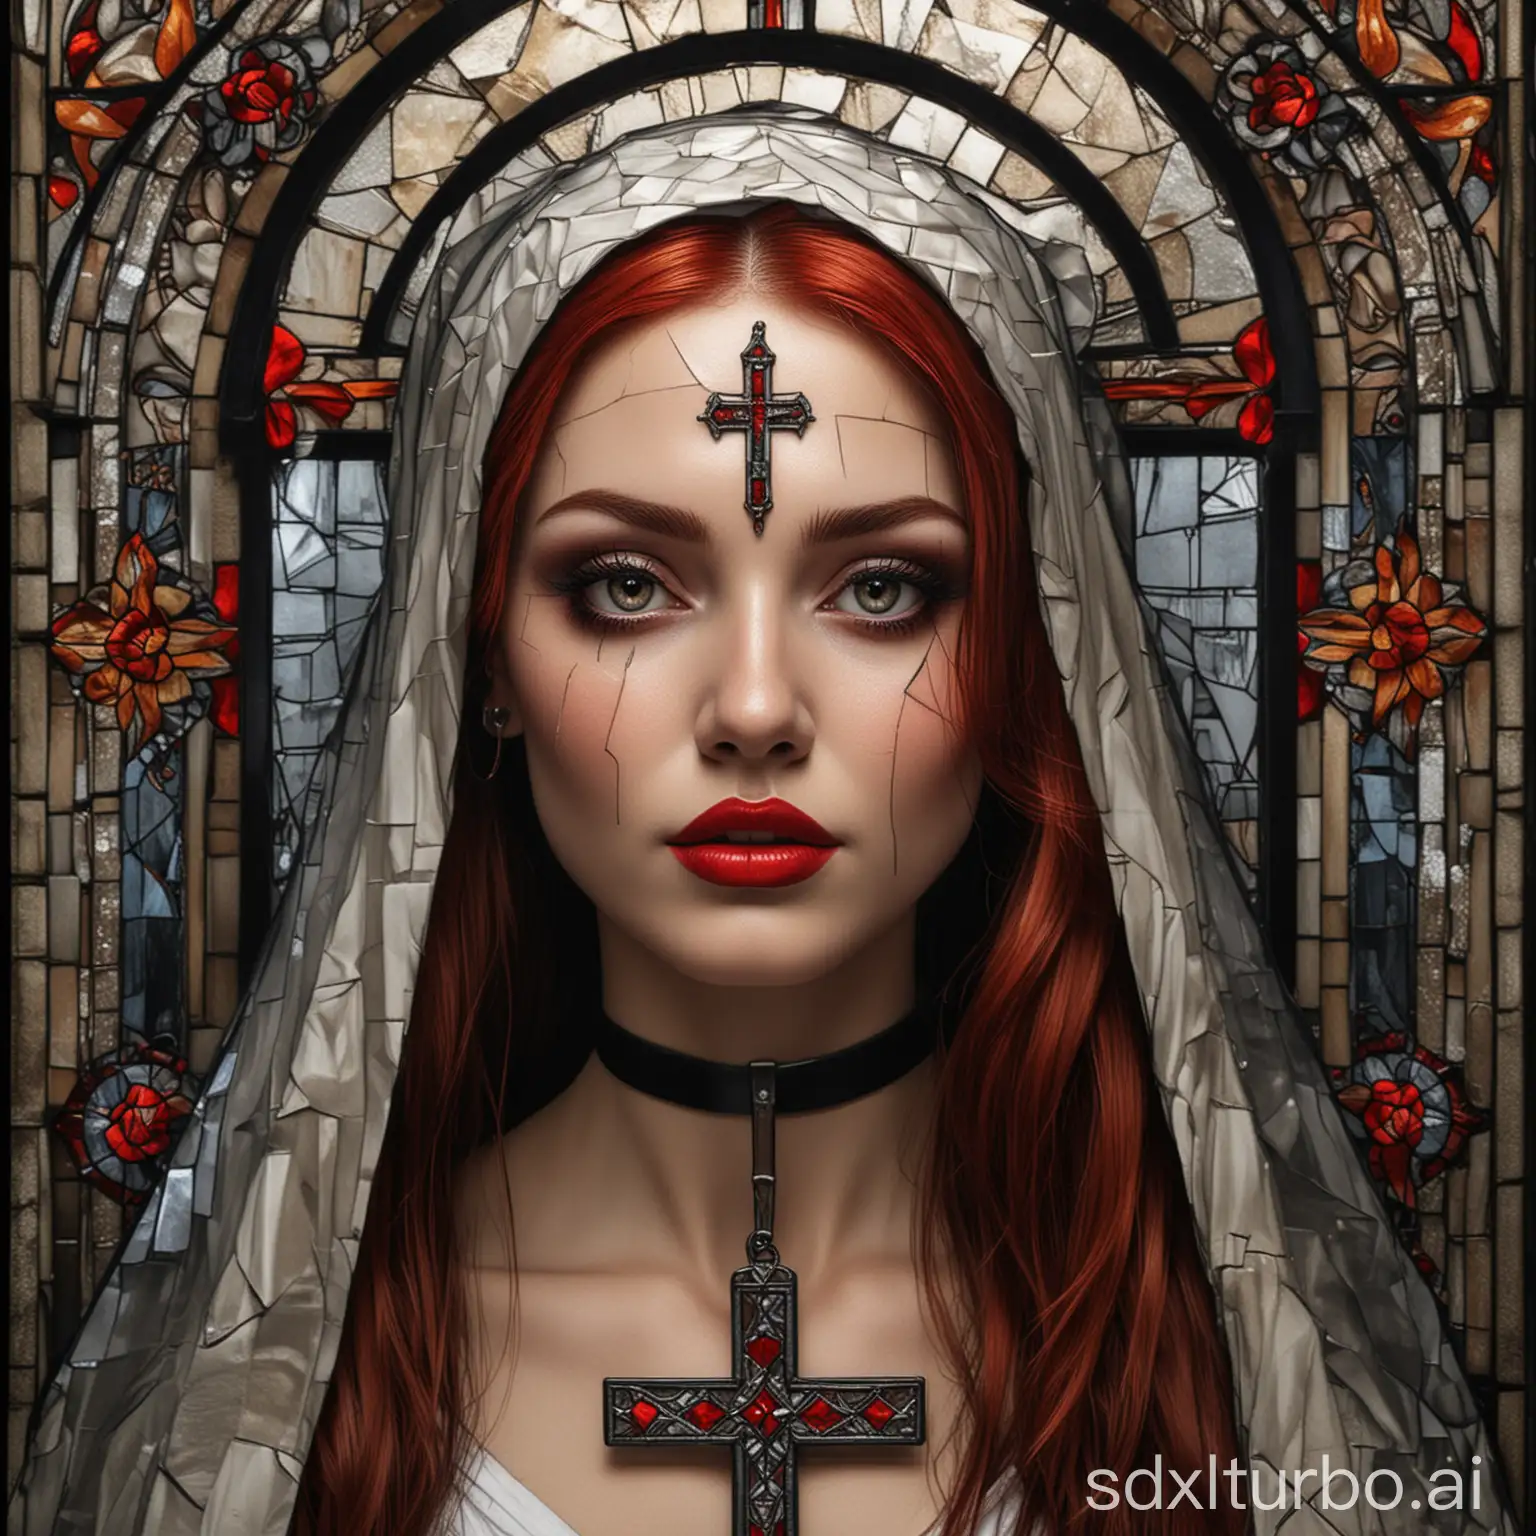 Mesmerizing-RedHaired-Nun-Holding-Titanium-Cross-in-Stained-Glass-Mosaic-Background